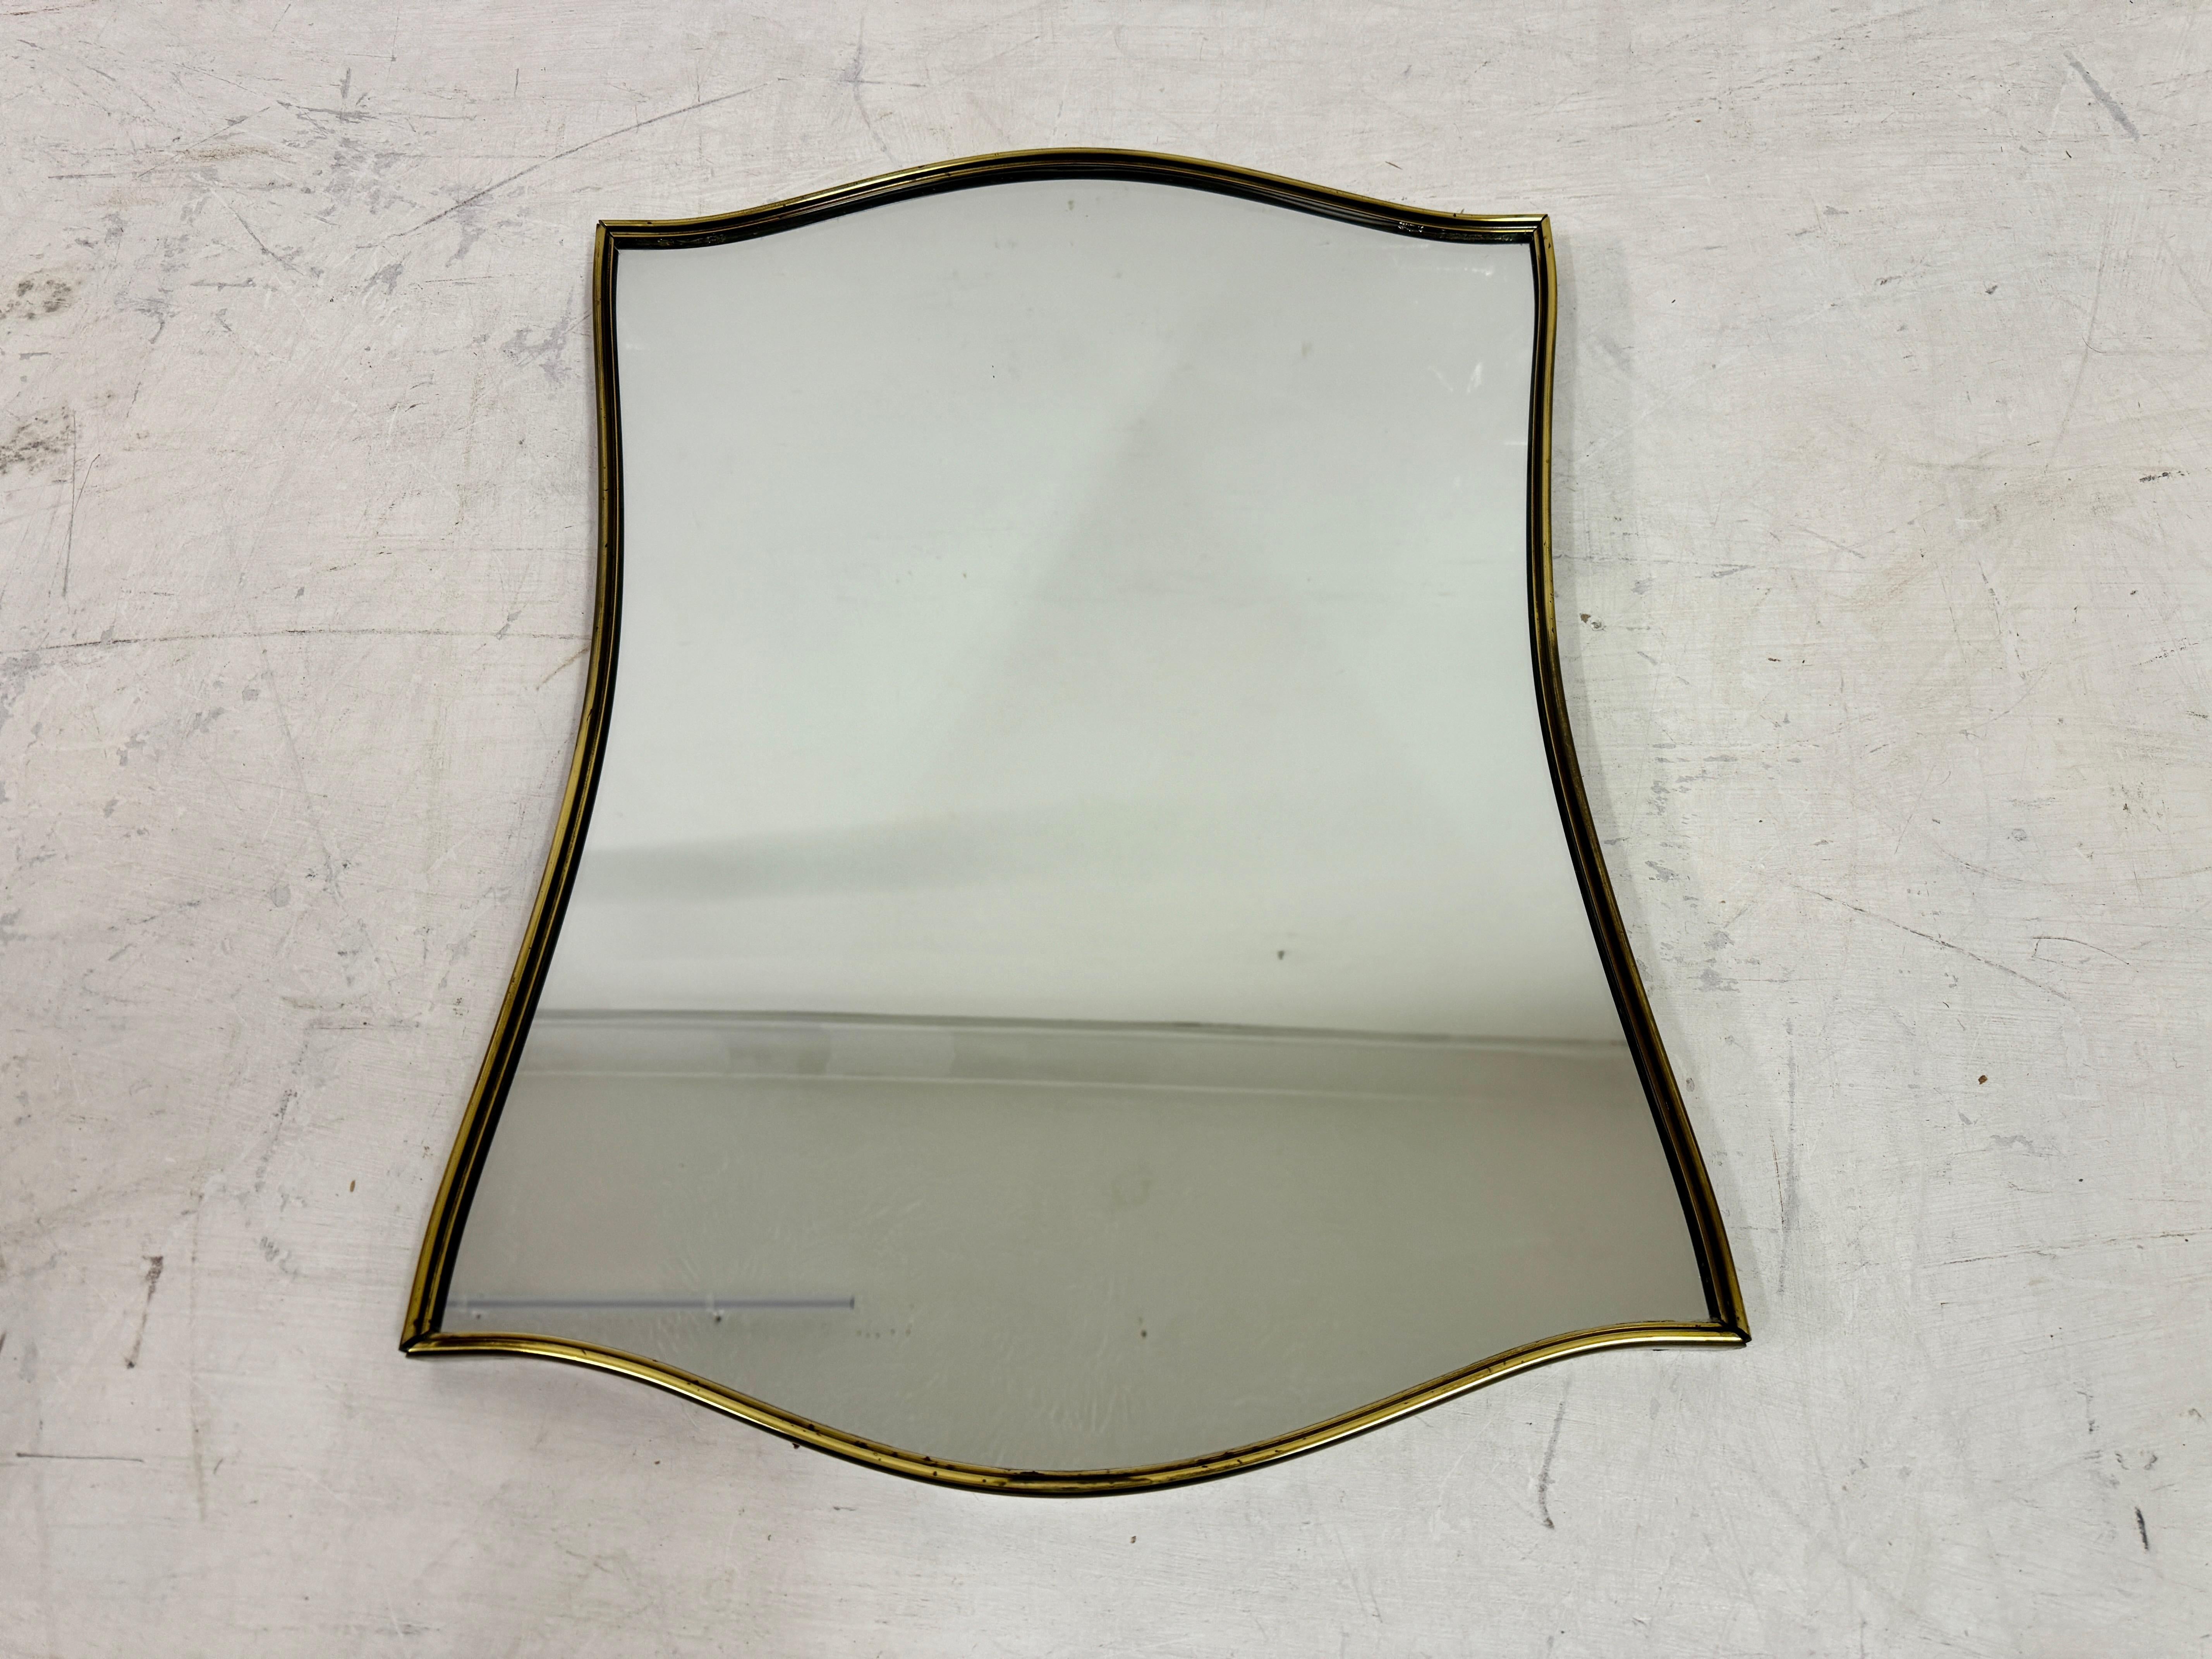 1950s Italian Brass Mirror In Good Condition For Sale In London, London